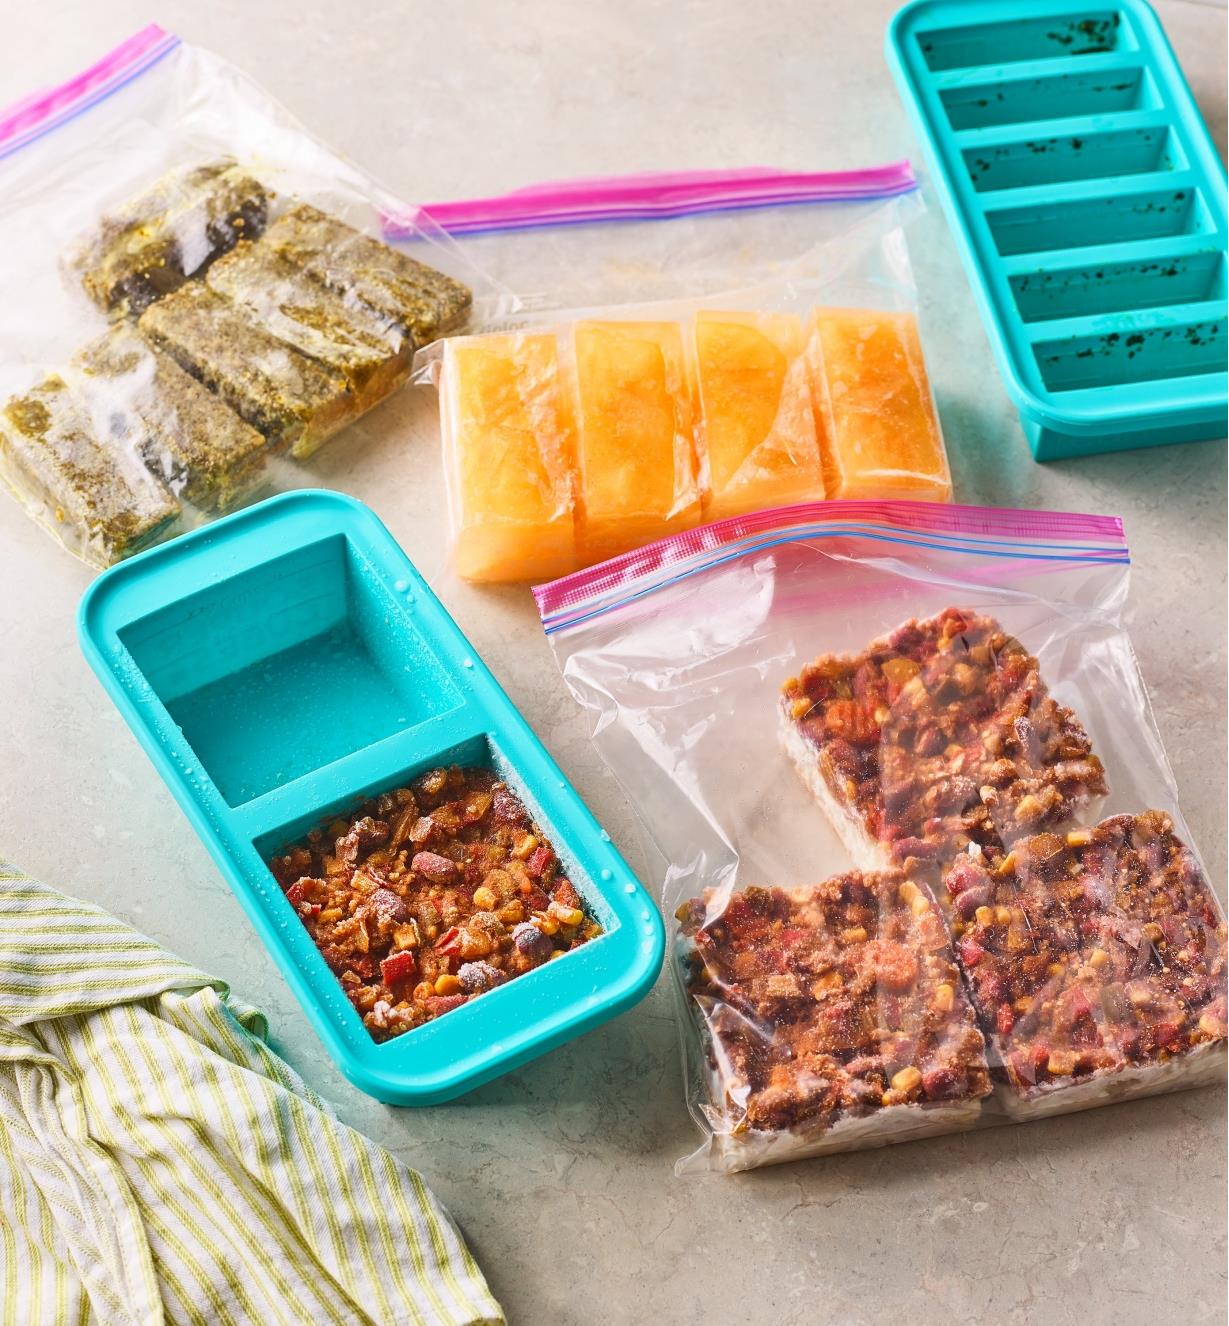 Two Souper Cube trays and freezer bags of frozen food